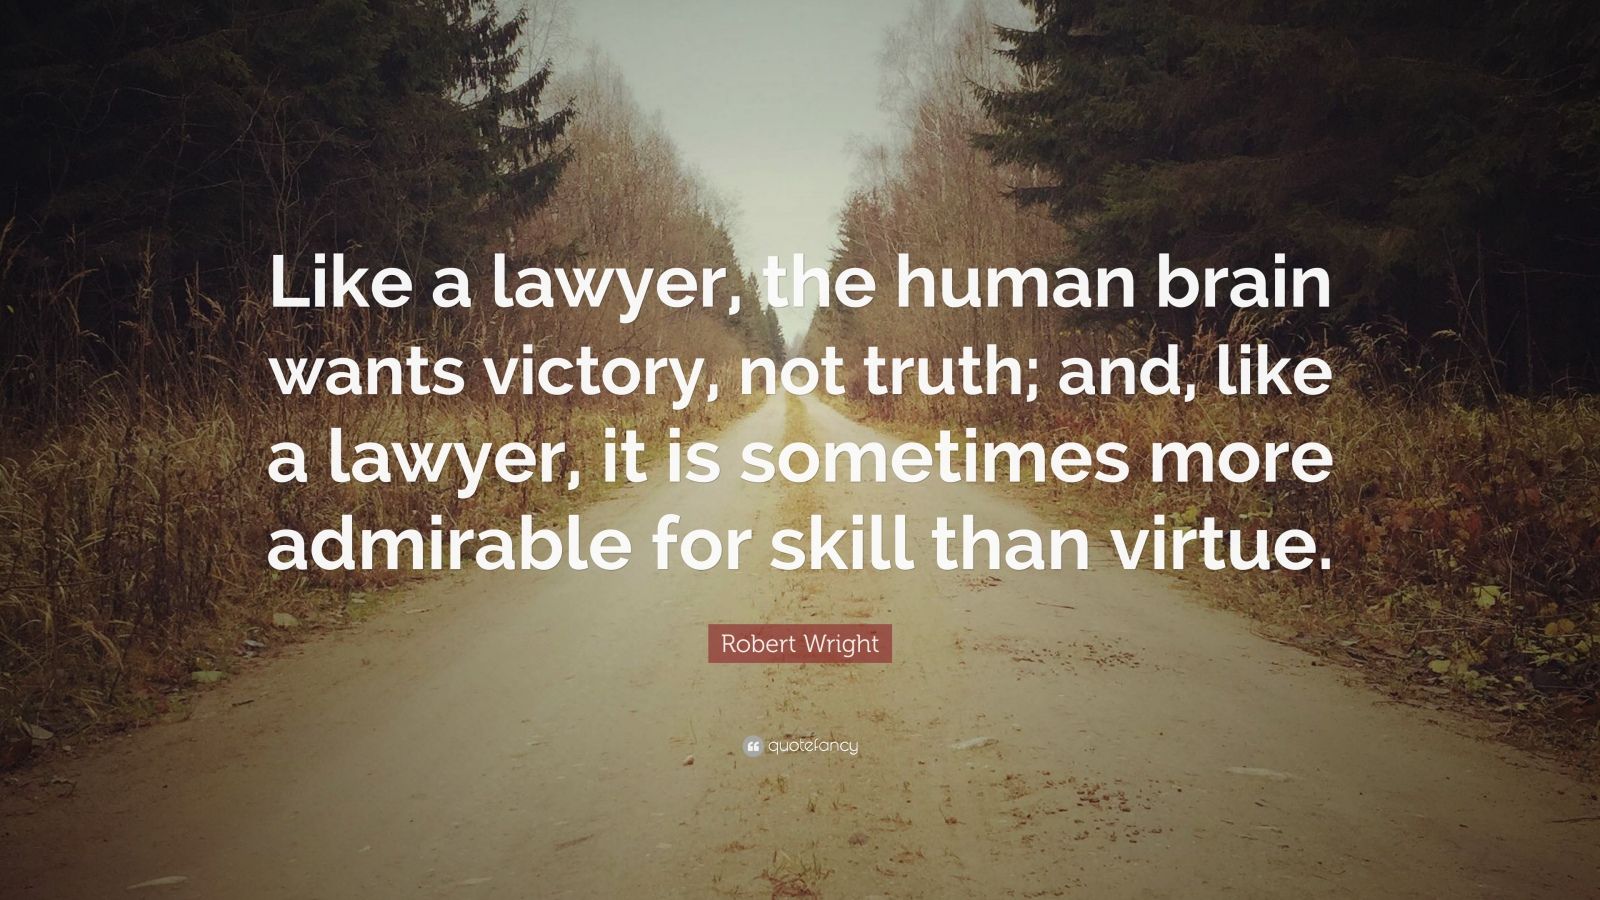 Robert Wright Quote: “Like a lawyer, the human brain wants victory, not